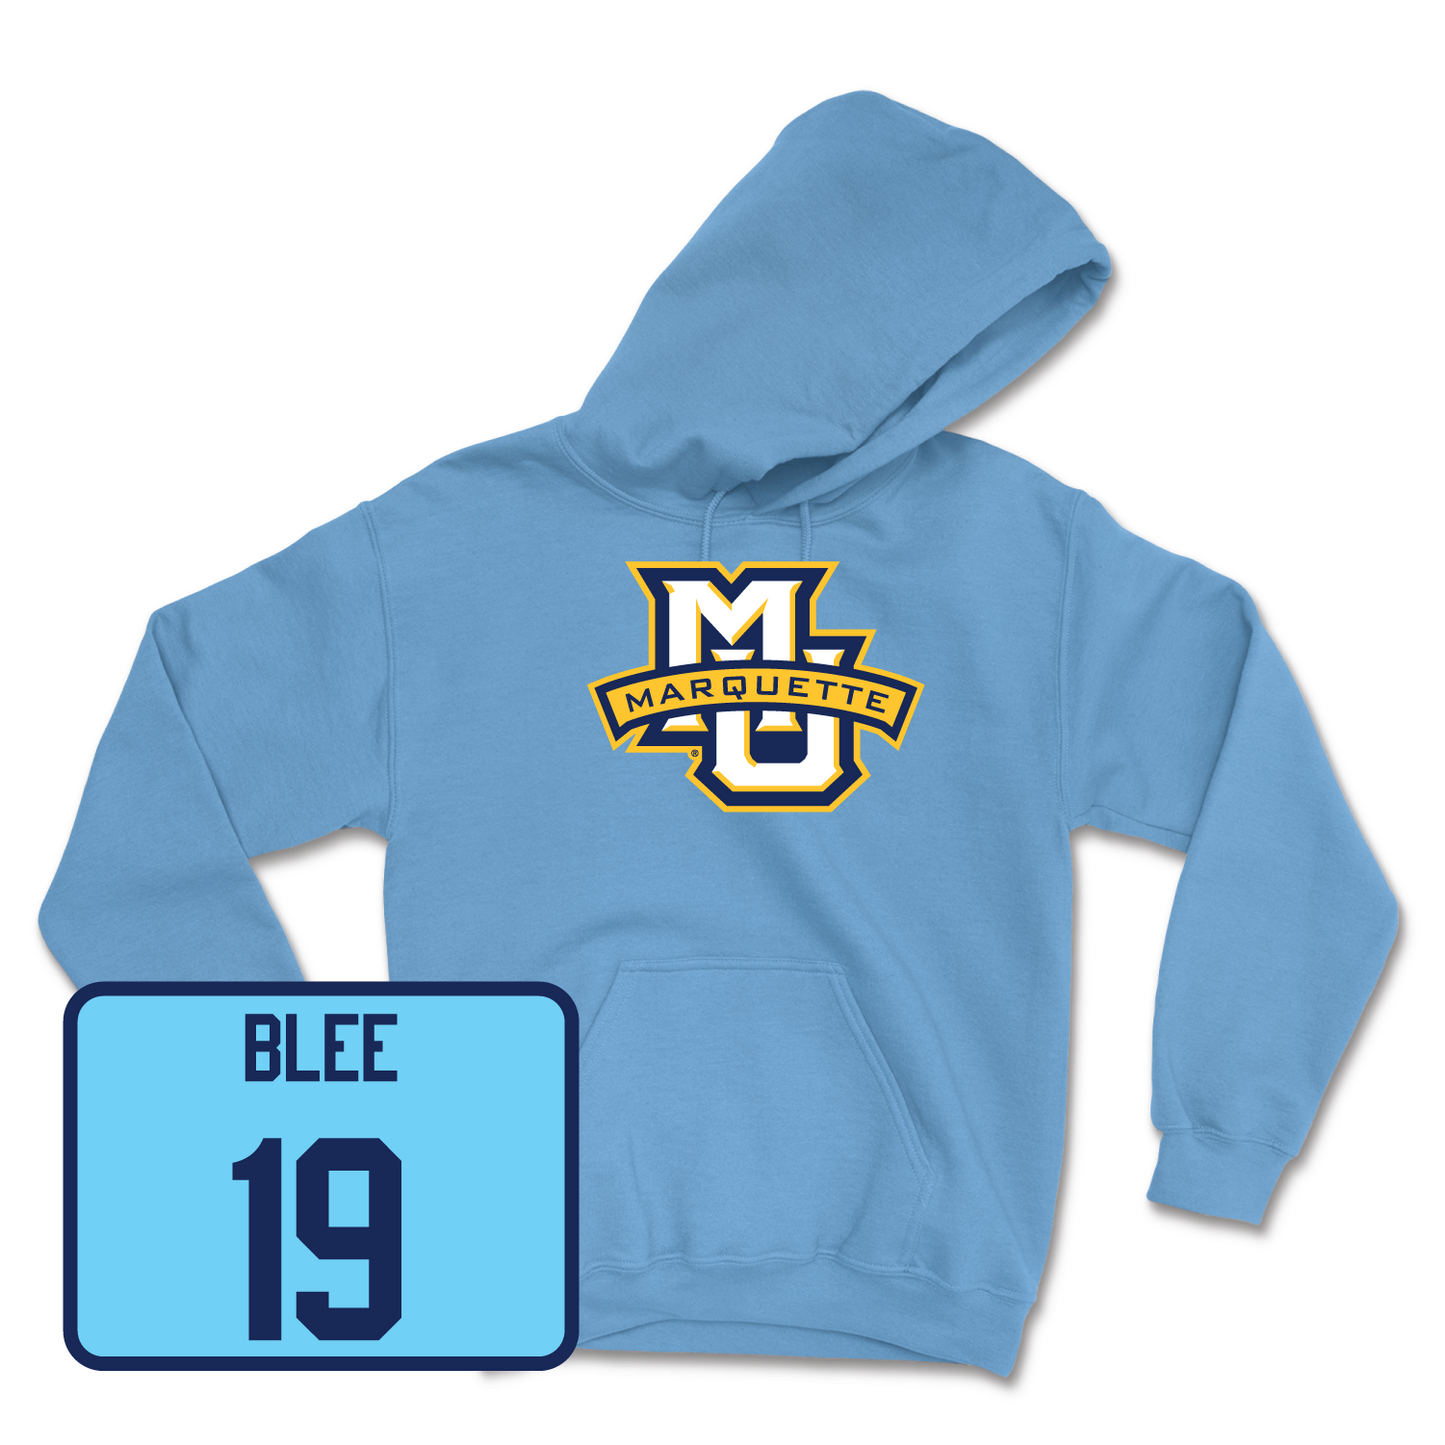 Championship Blue Women's Lacrosse Marquette Hoodie 2 Large / Mary Blee | #19